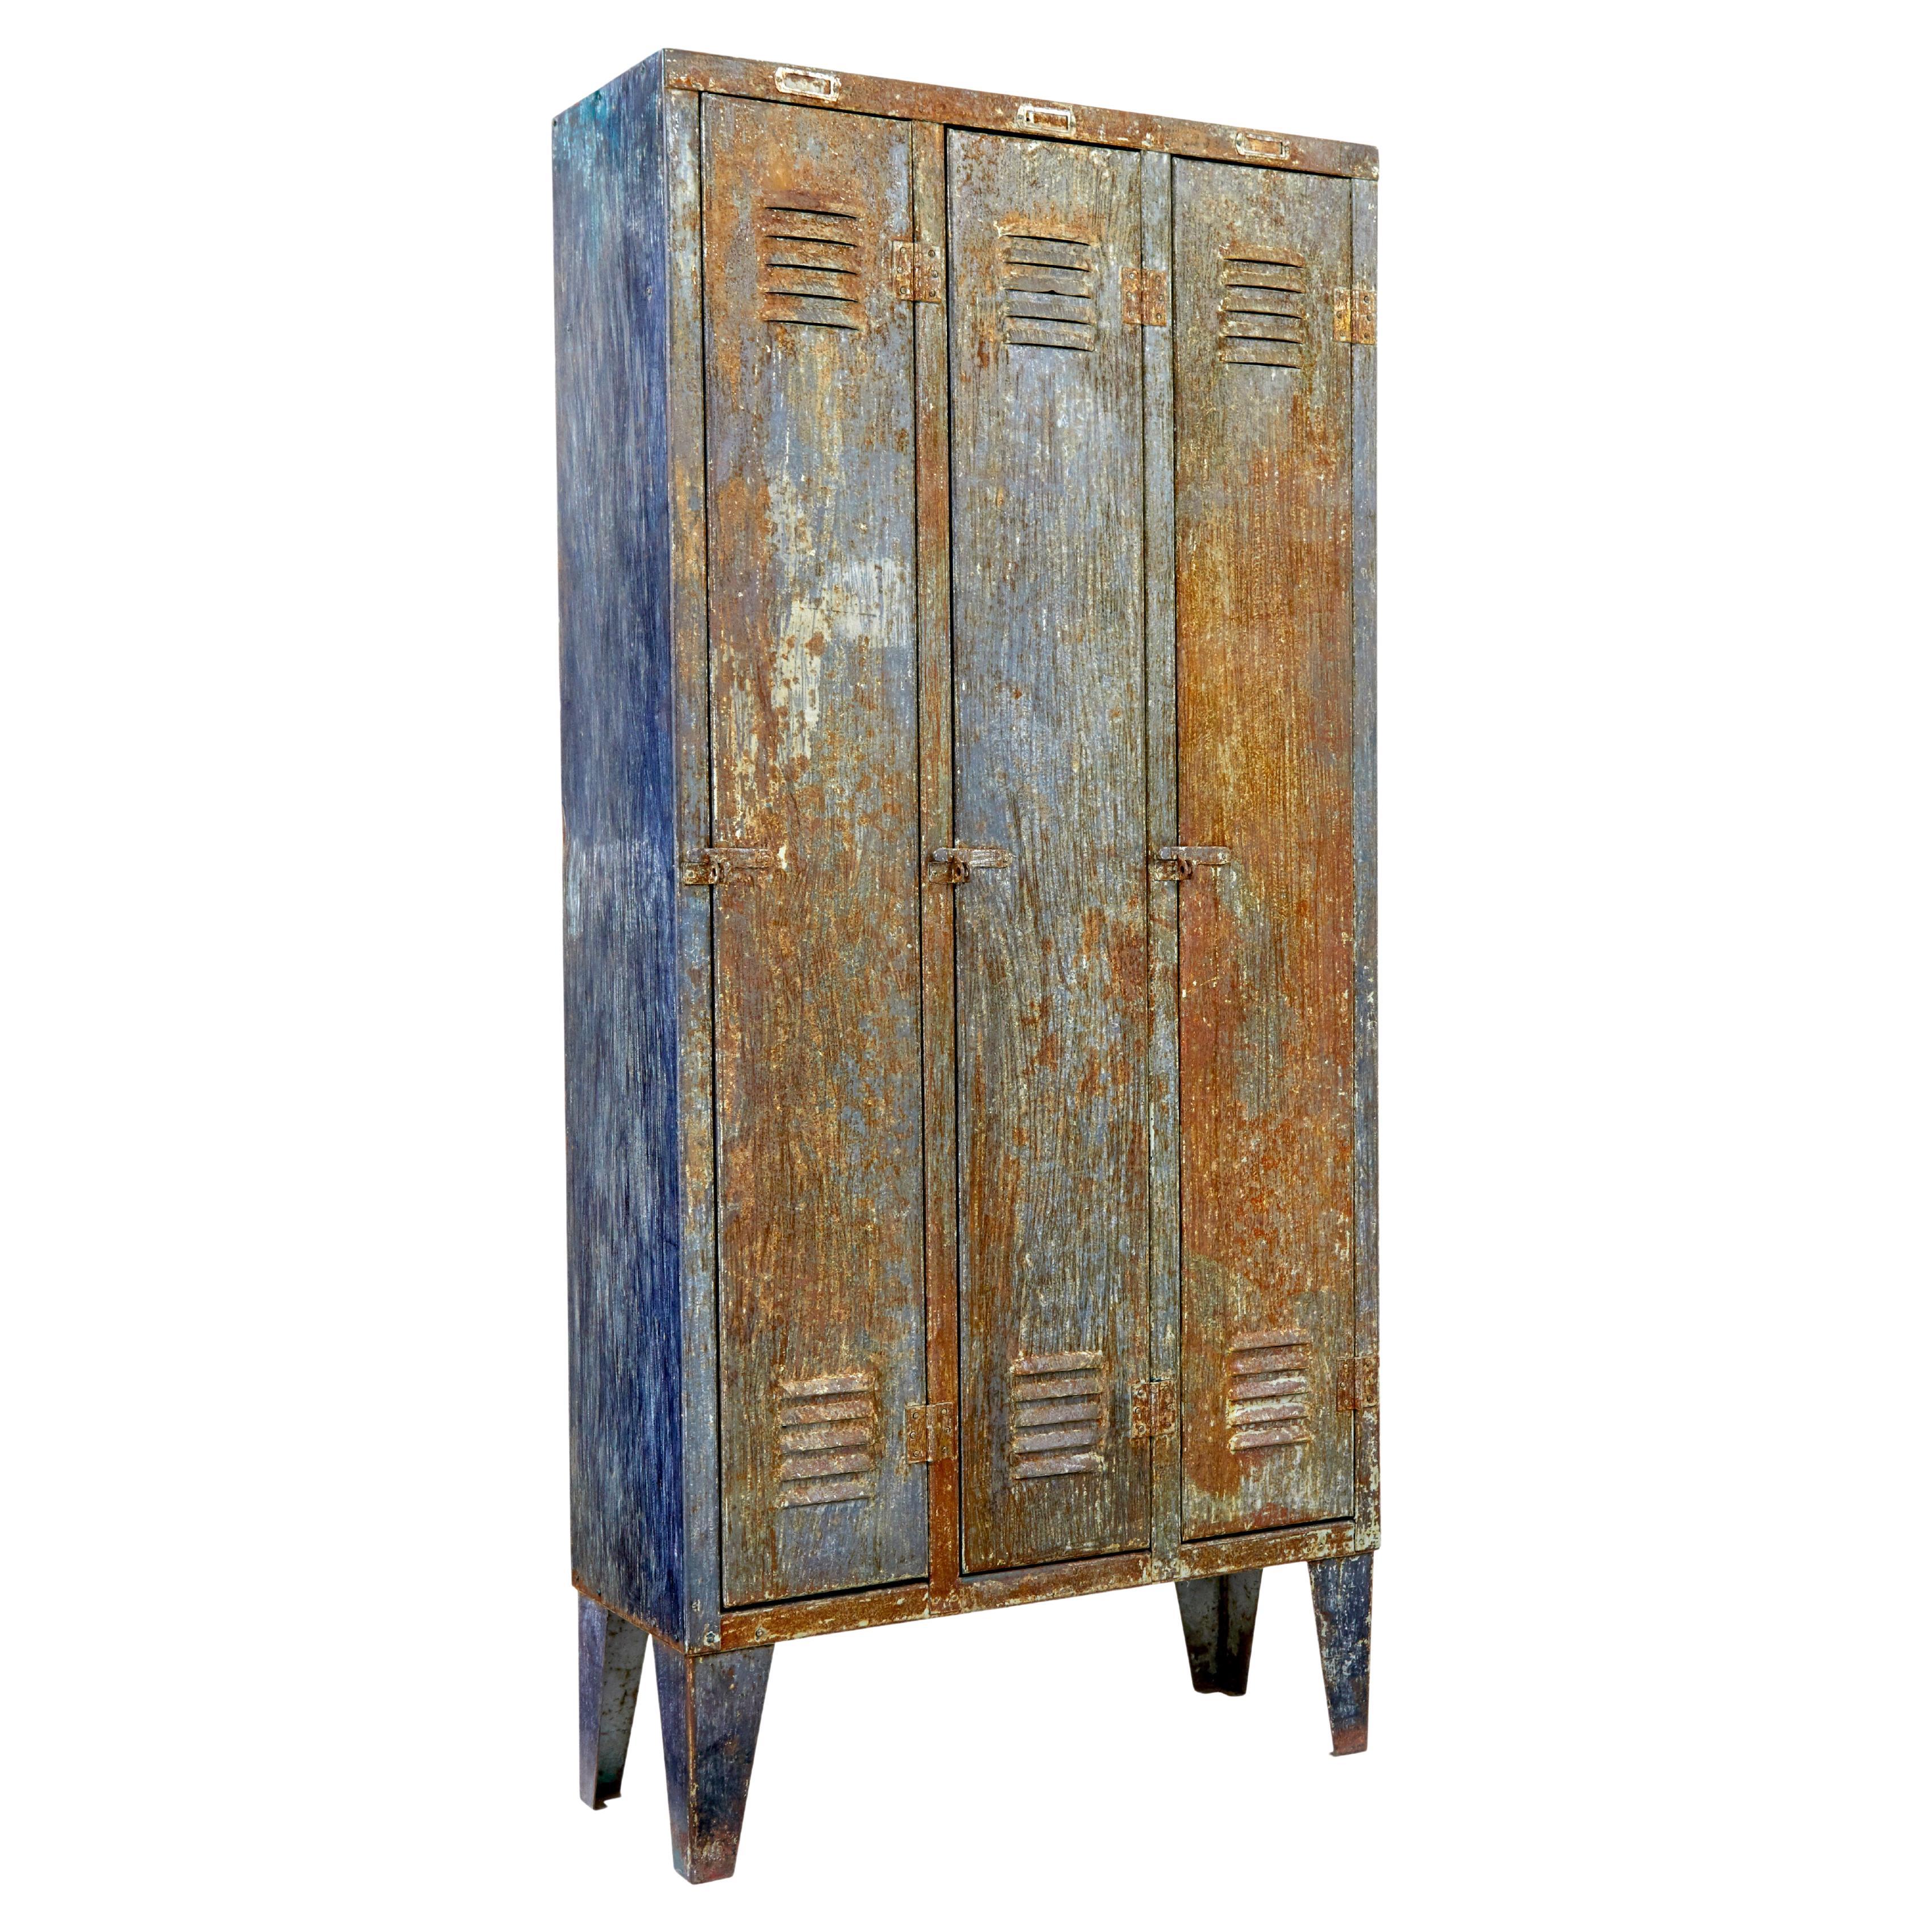 Mid 20th century distressed industrial cabinet